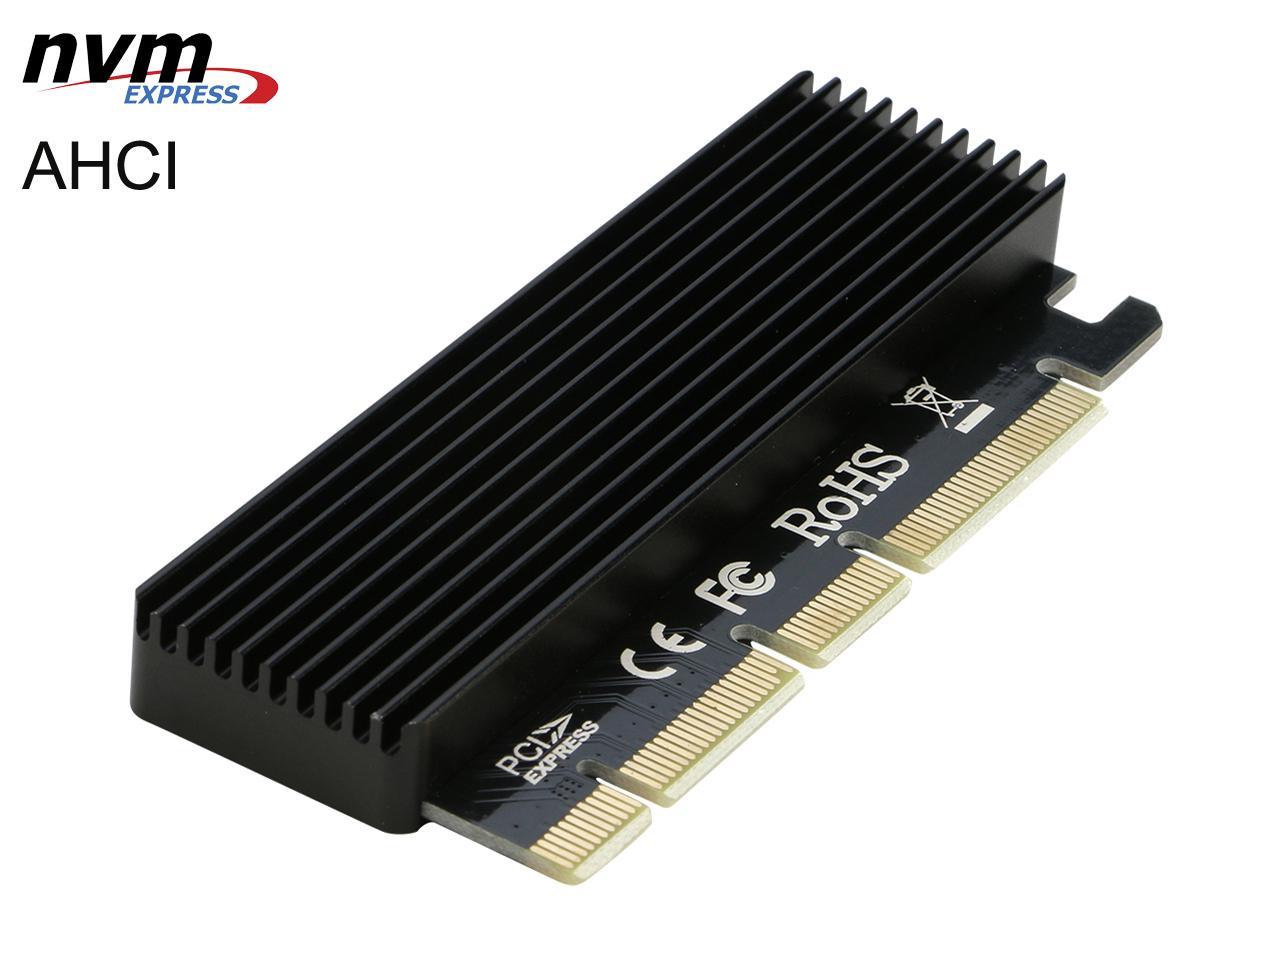 4X 8X 16X to PCI-e M.2 SSD Drive Adapter Converter for AHCI and NVMe Protocols PCI 